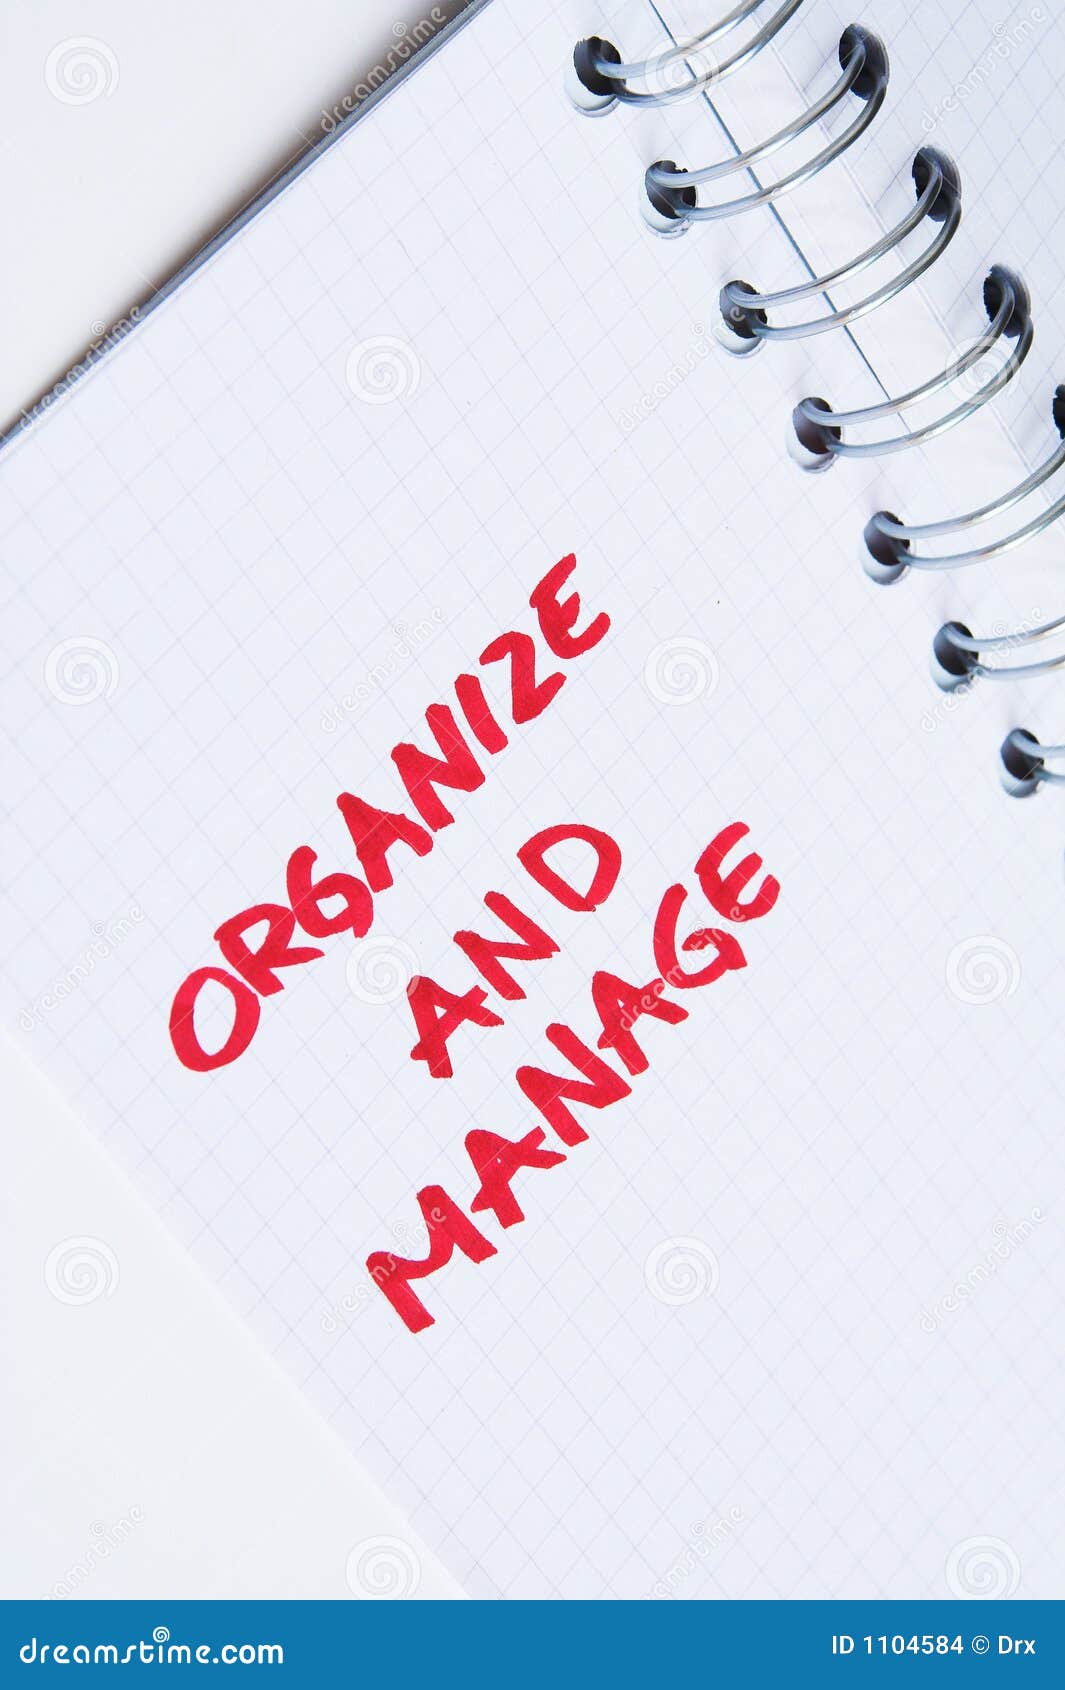 organize and manage - notebook note